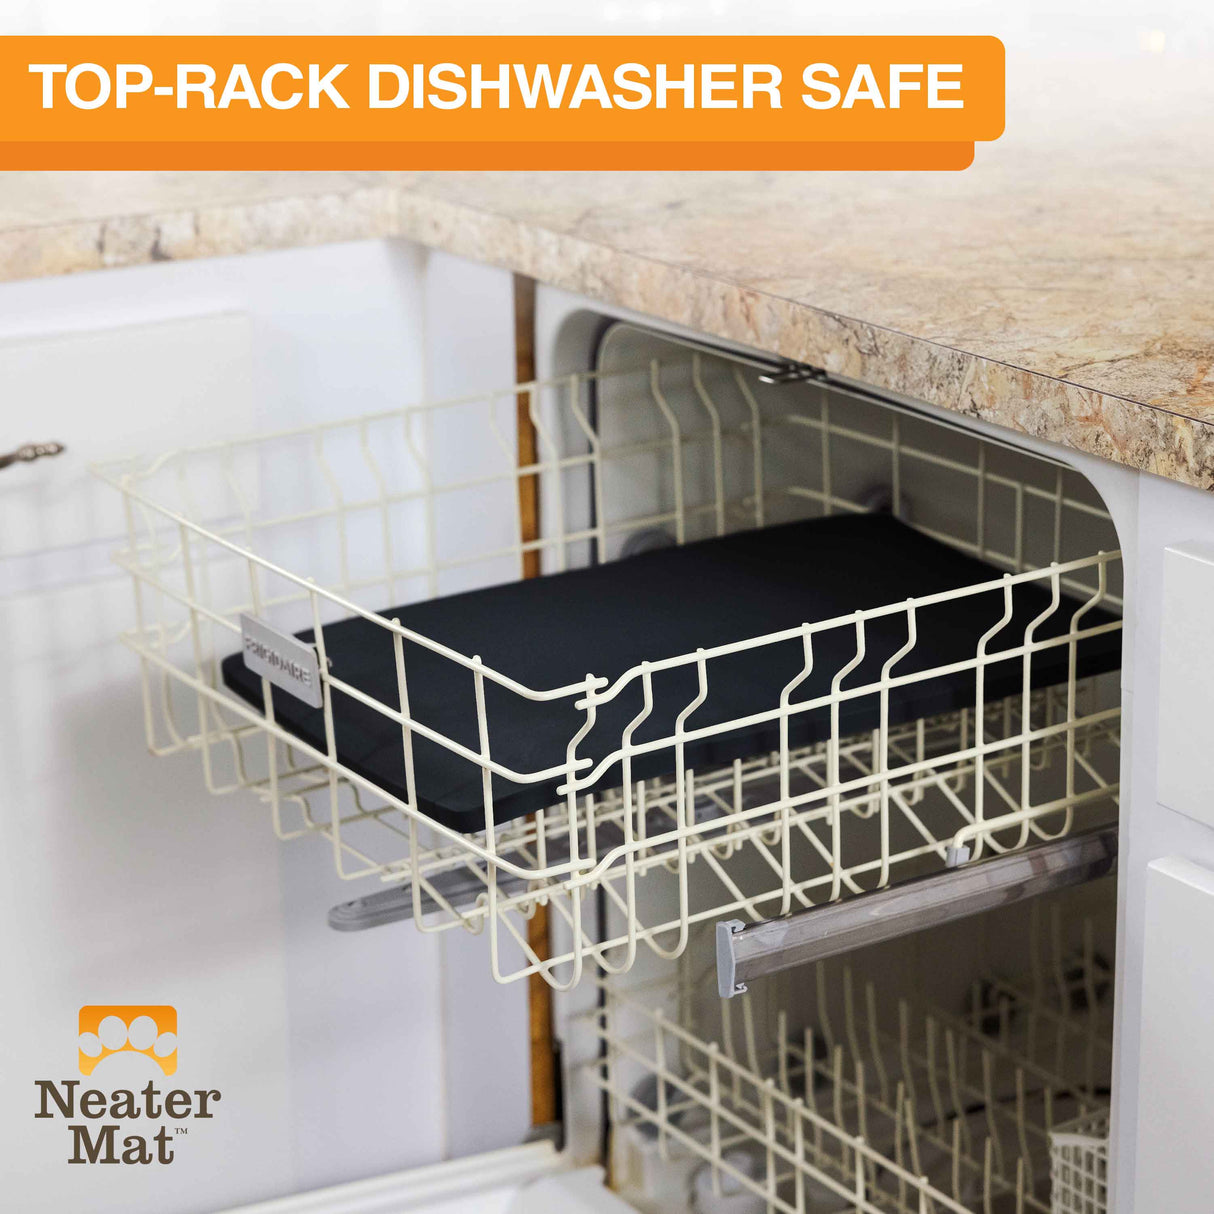 The Neater Mat being placed in the top rack of the dishwasher